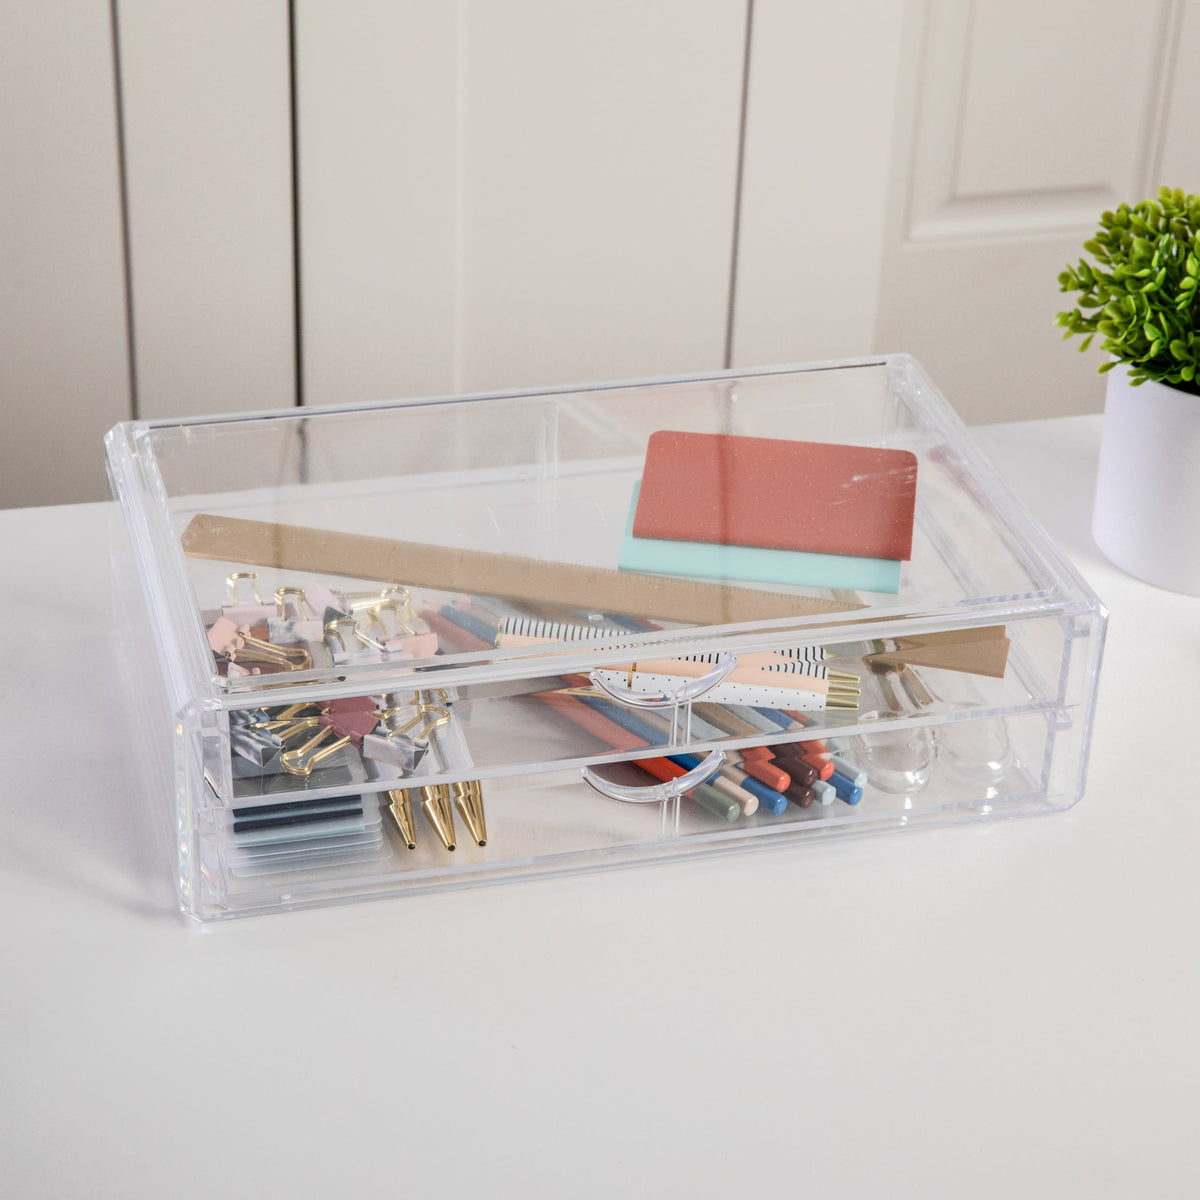 Desktop Organization Box with 2 Half Moon Opening Pullout Drawers-Clear Plastic